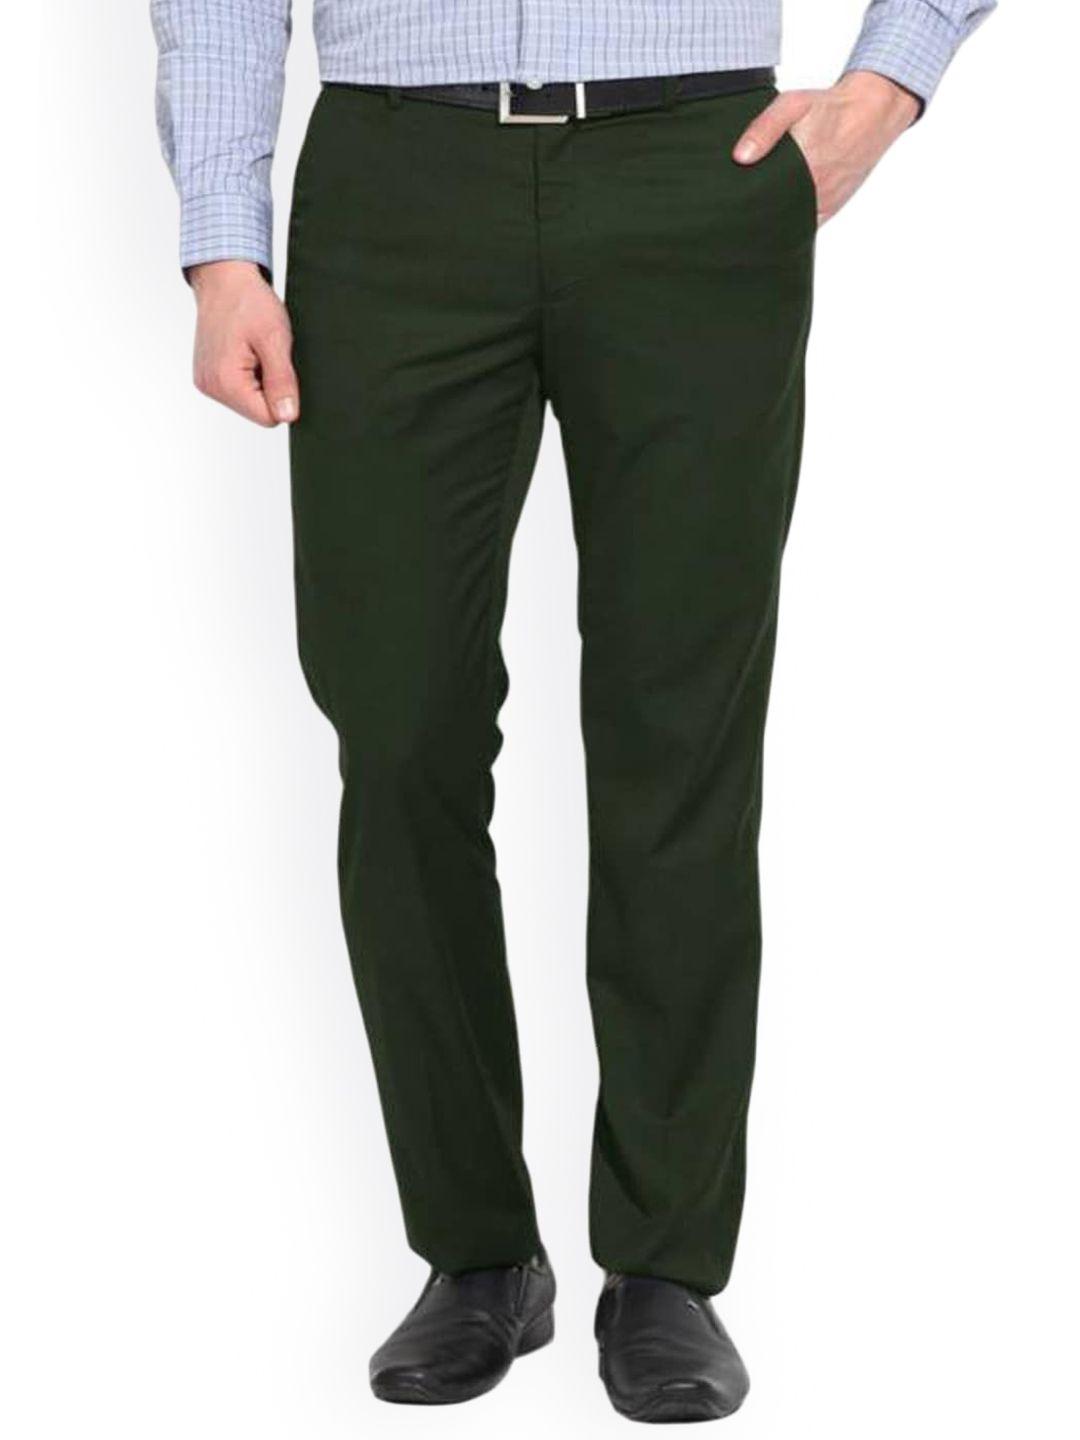 ad & av men olive green classic easy wash chinos trousers